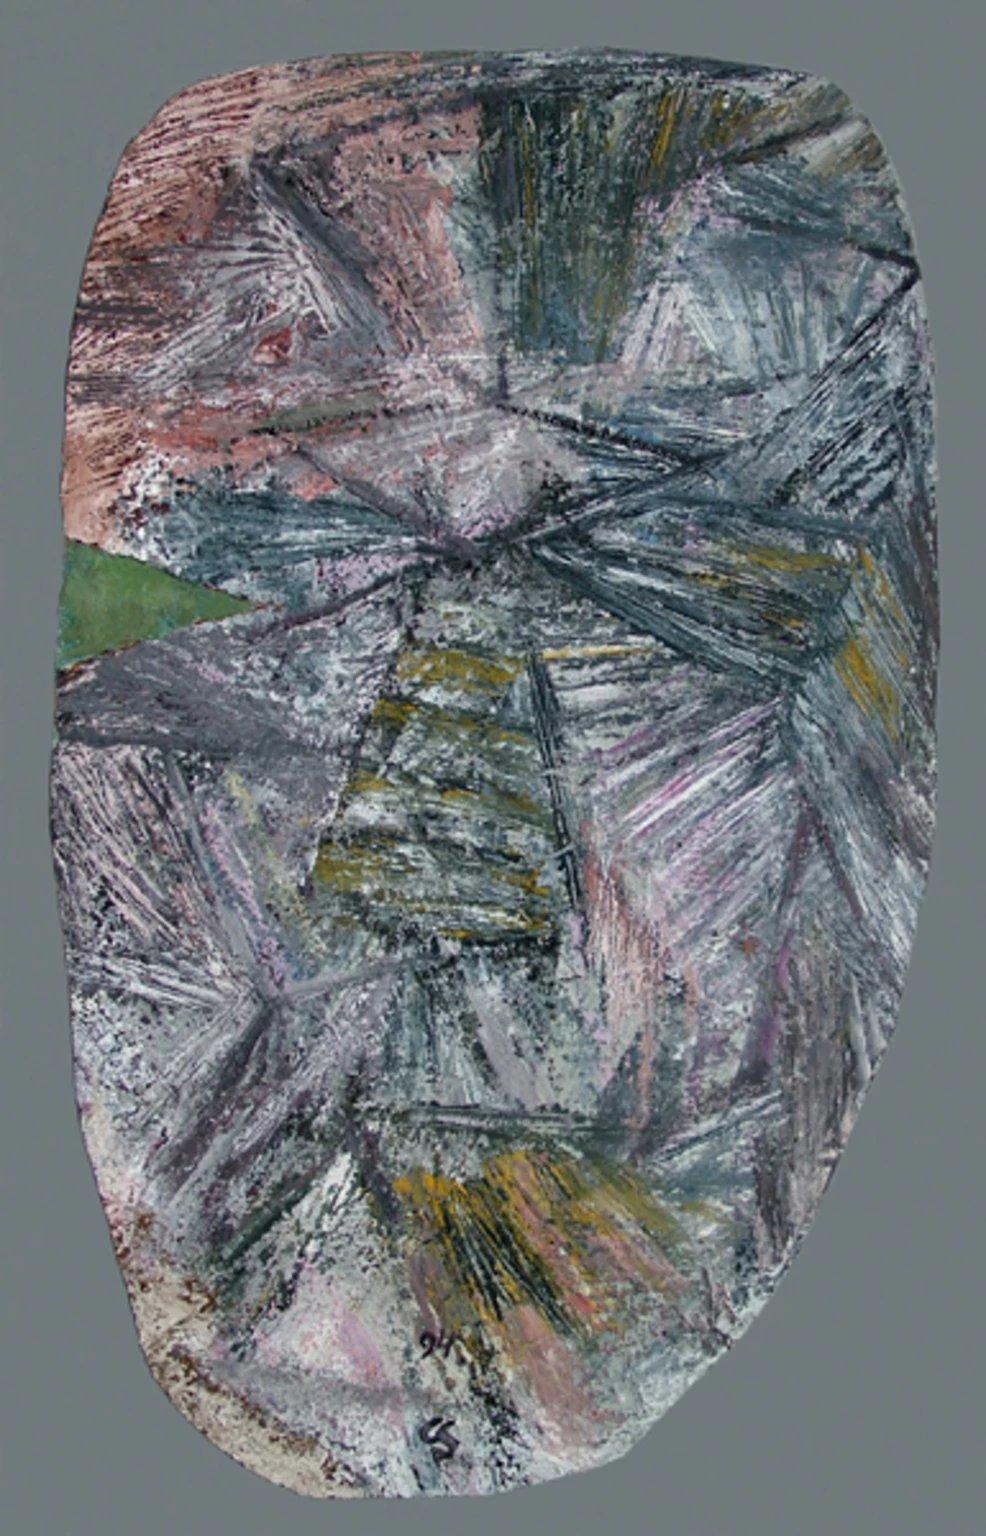 Melting with the snow(mask), 1994 - egg tempera, oil, canvas, 130 x 84 cm